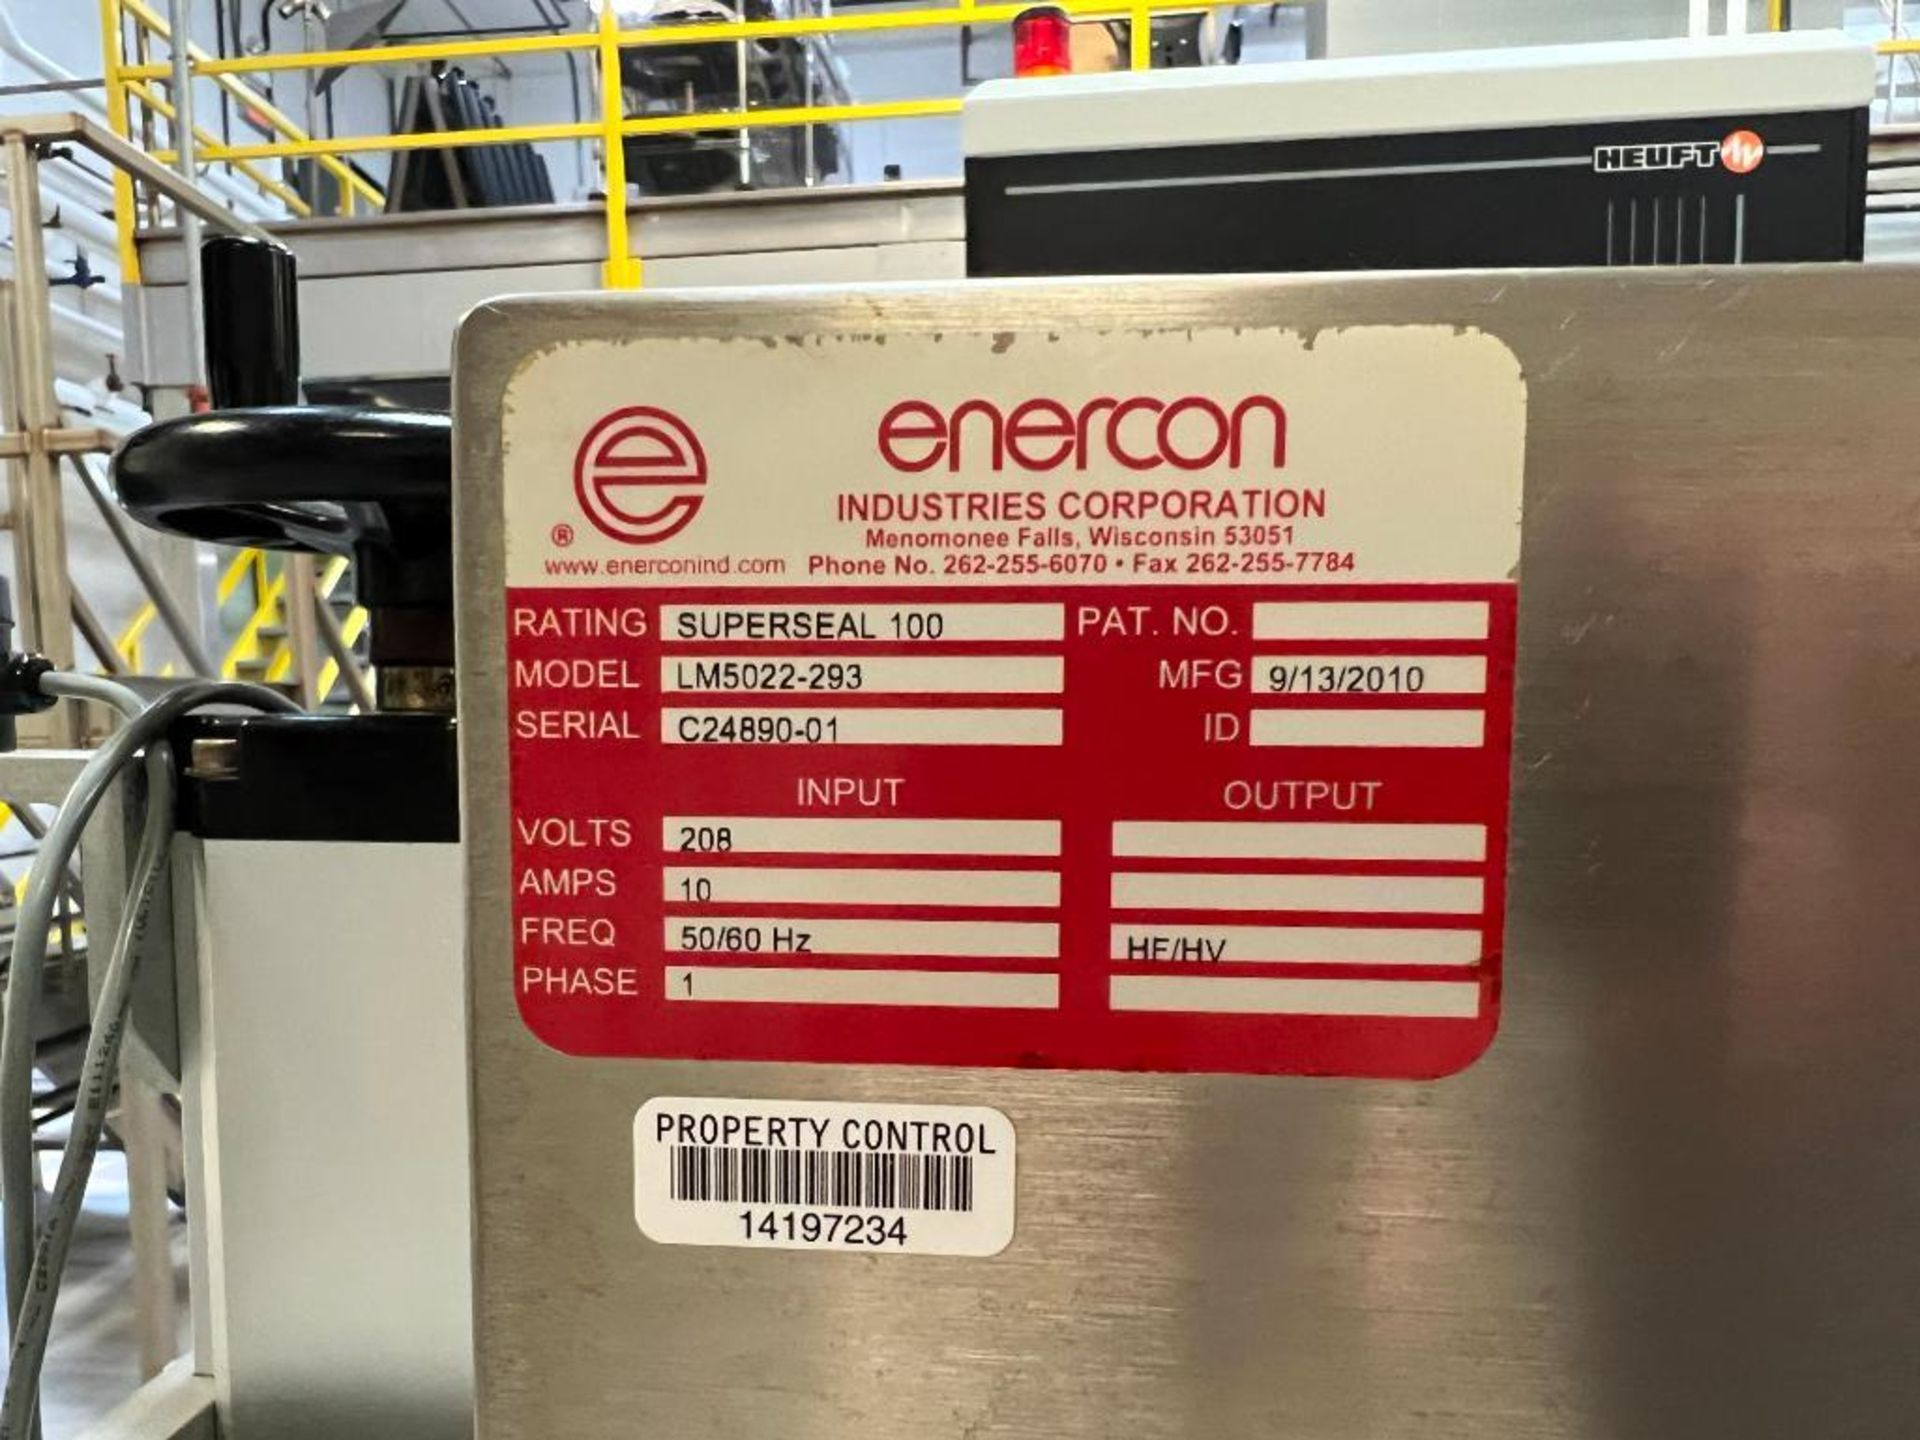 Enercon Industries Corporation Superseal 100 Induction Sealer, Model: LM5022-293, S/N: C24890-01 - S - Image 2 of 2